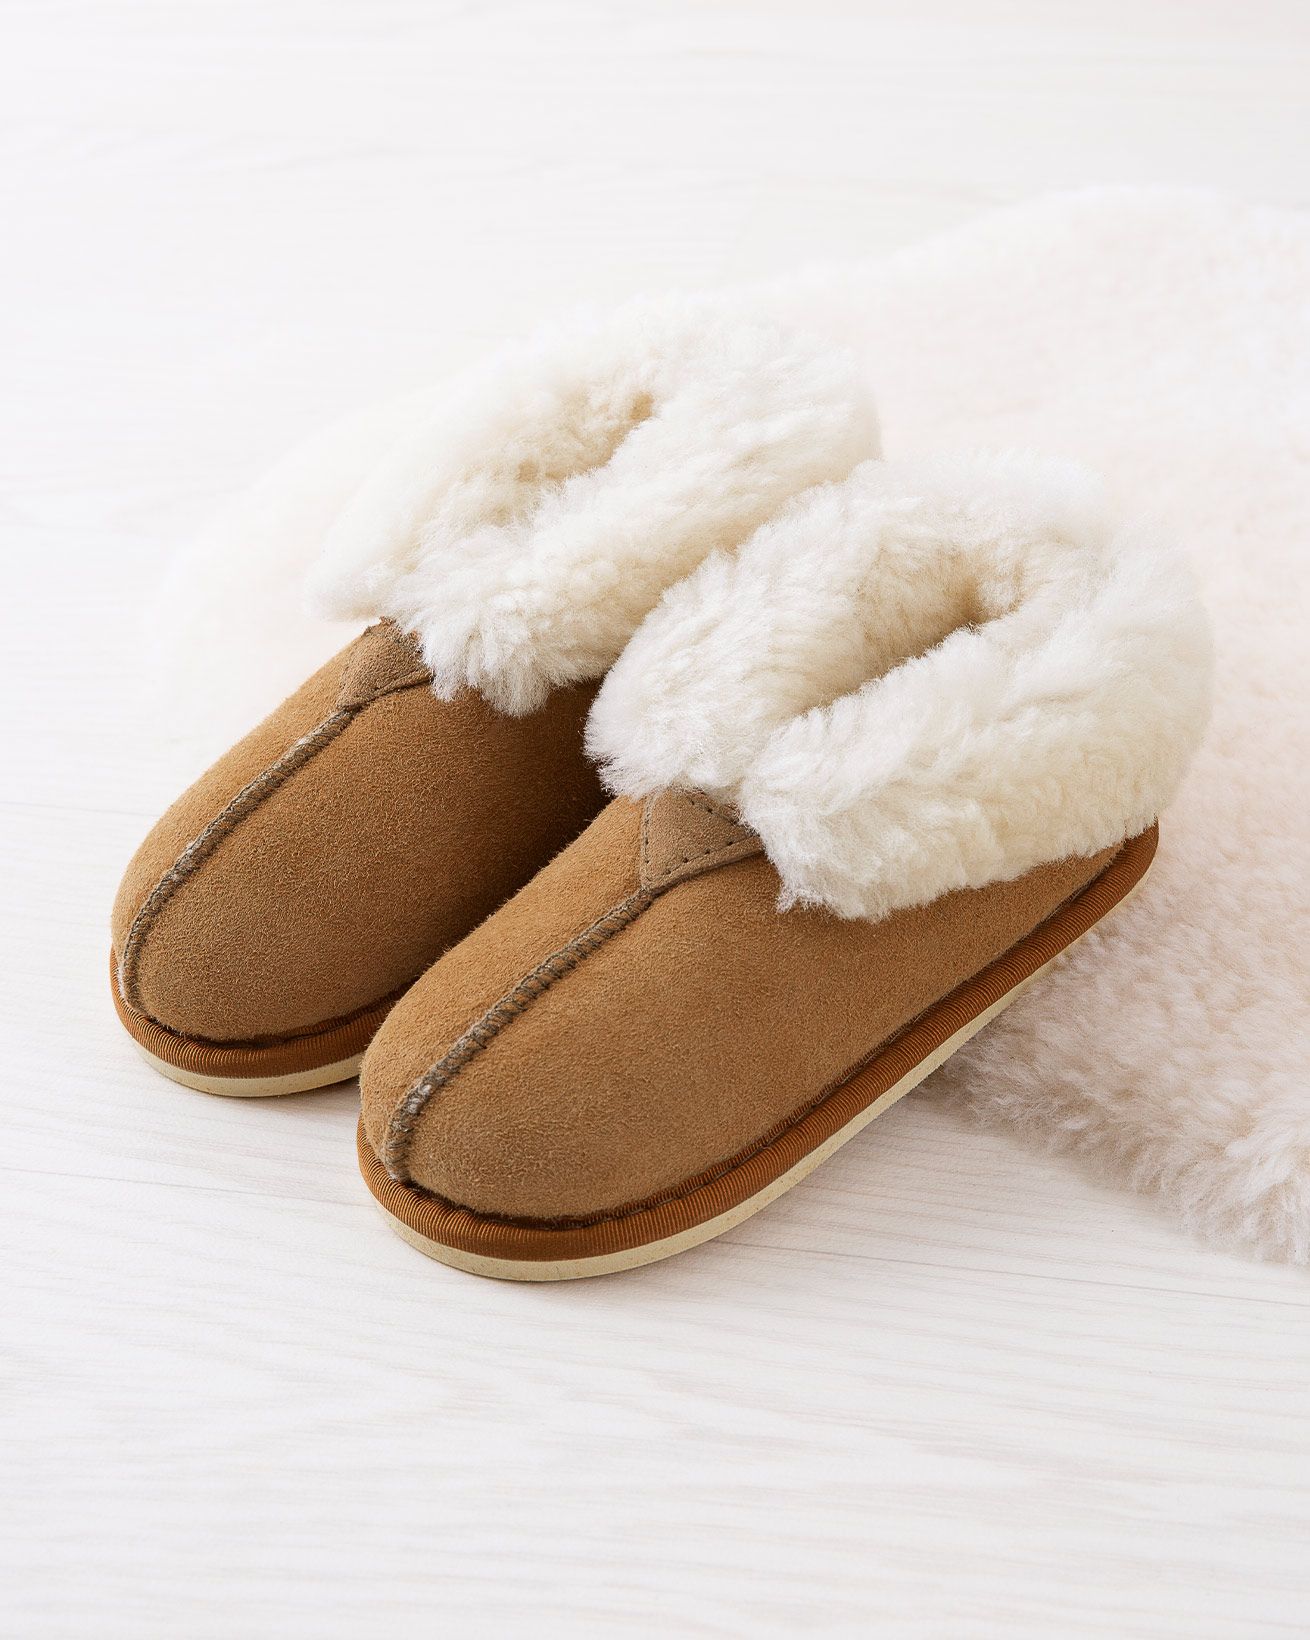 2460_kids-bootee-slippers_spice_lifestyle_lfs.jpg